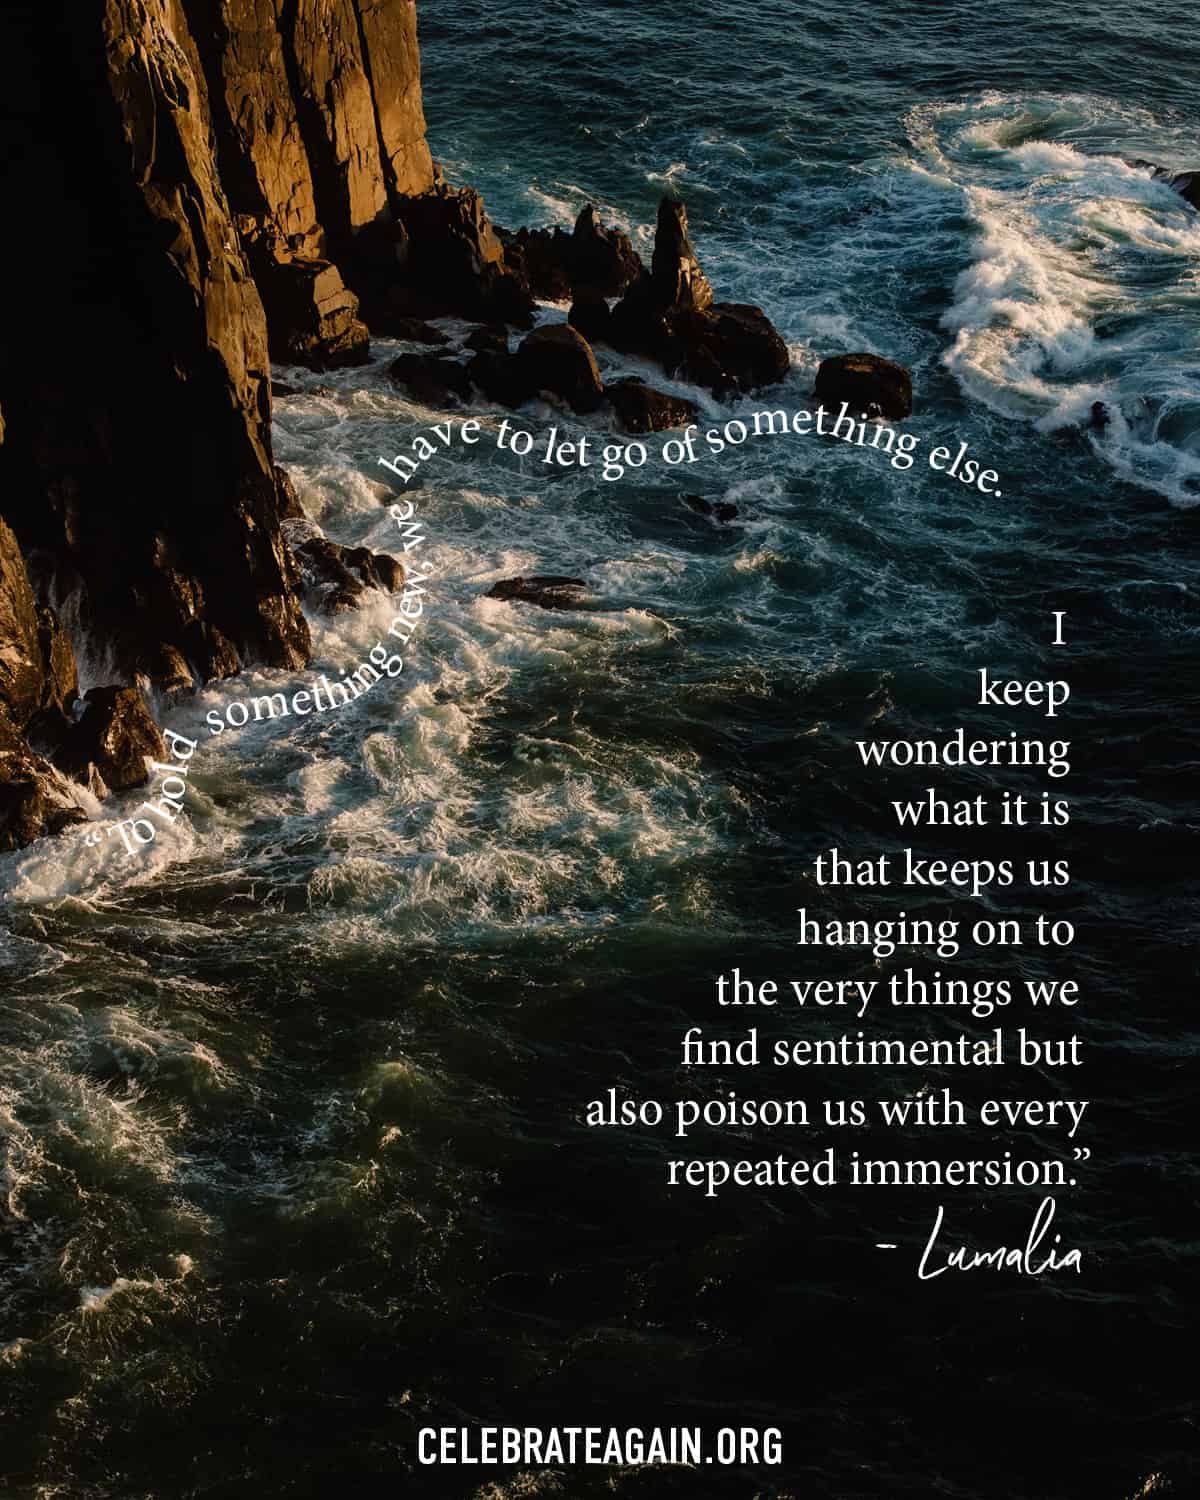 a self love quote saying "To hold something new, we have to let go of something else. I keep wondering what it is that keeps us hanging on to the very things we find sentimental but also poison us with every repeated immersion." Lumalia over a photo of water hitting a cliff